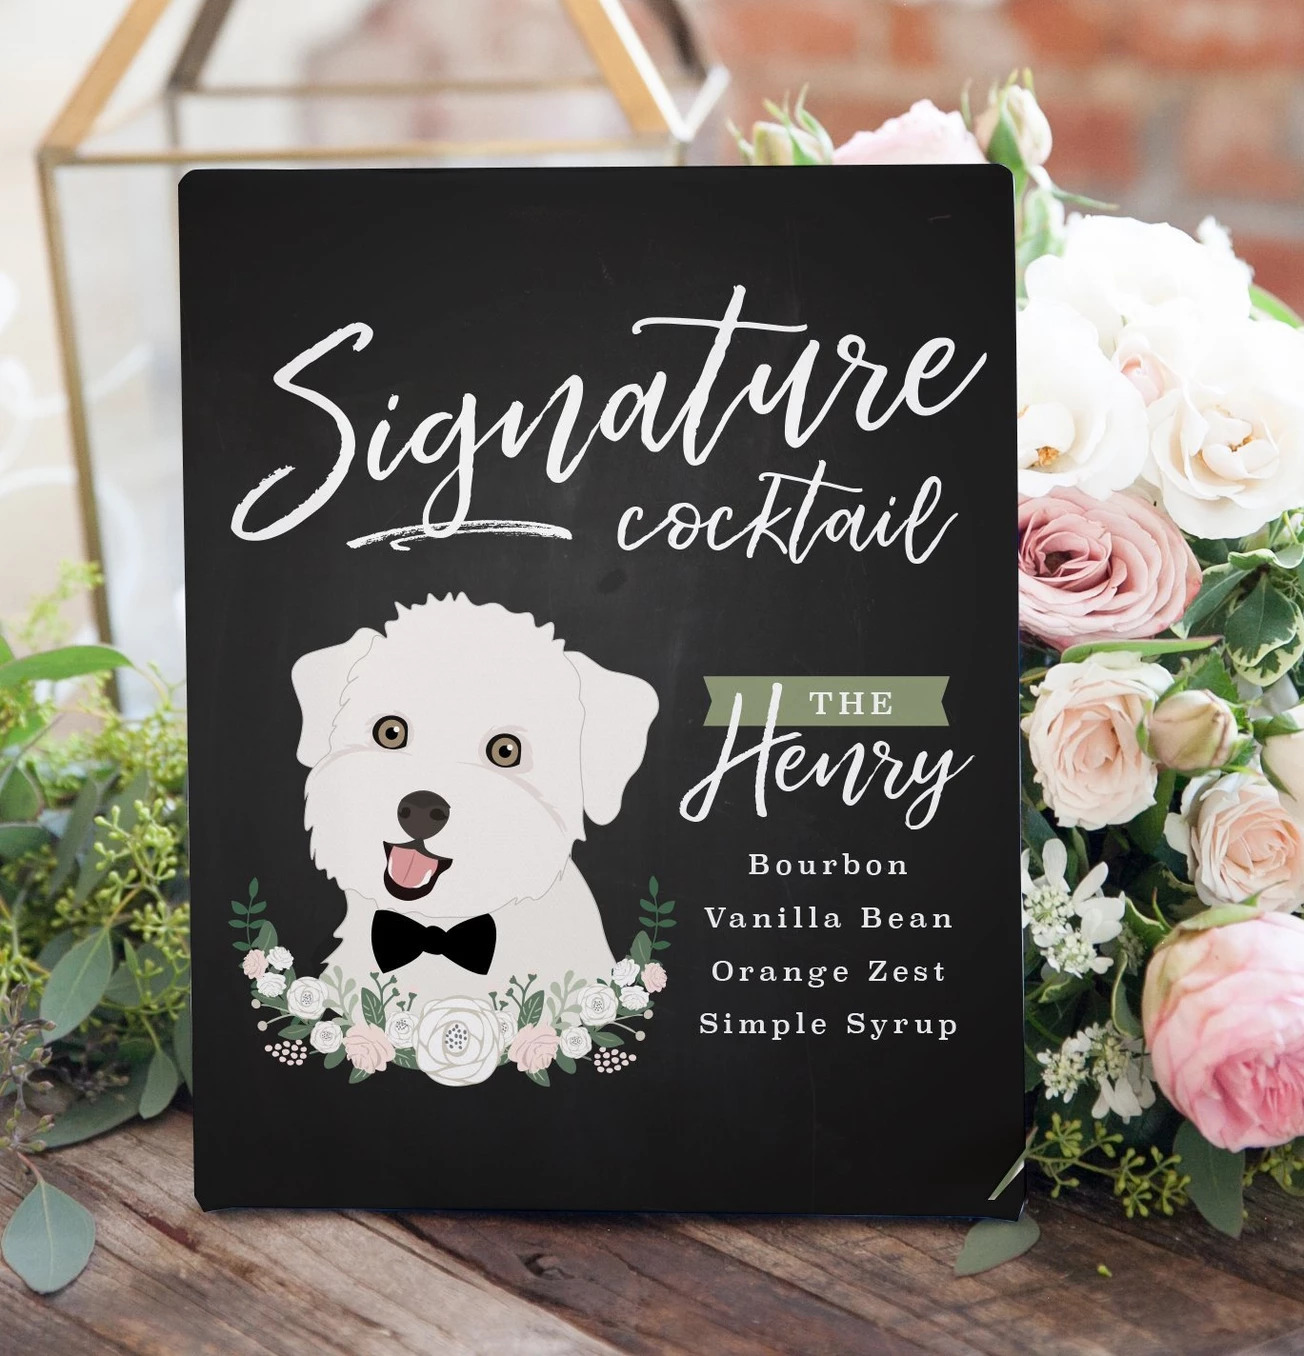 name your signature wedding cocktail after your dog!